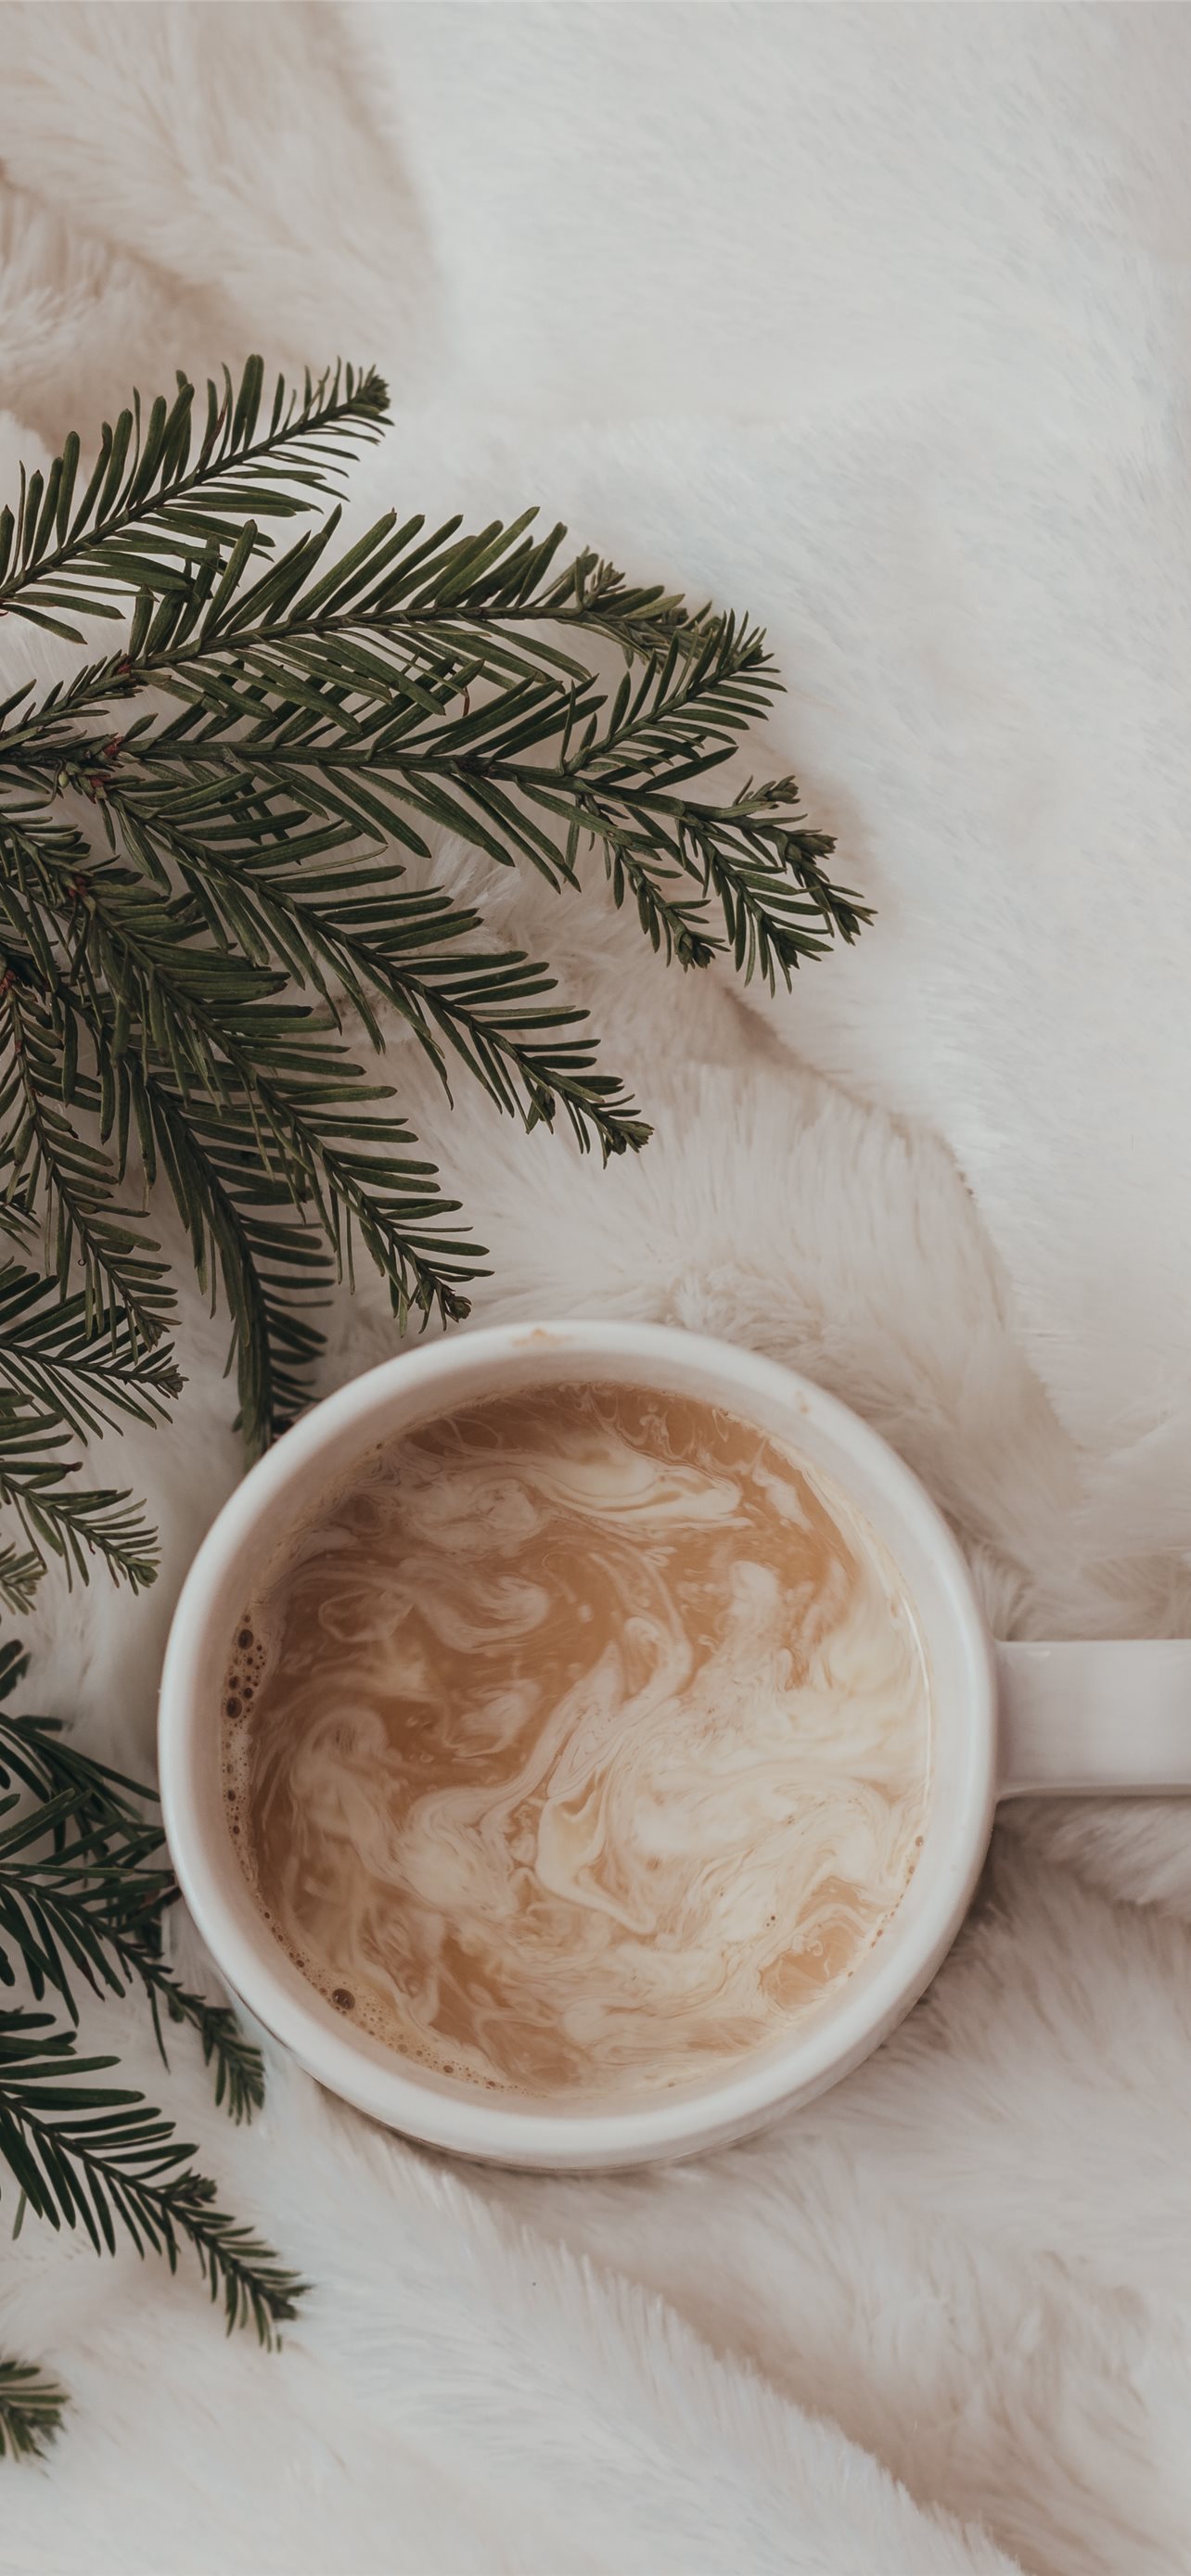 cup of coffee latte on fur textile iPhone wallpaper 